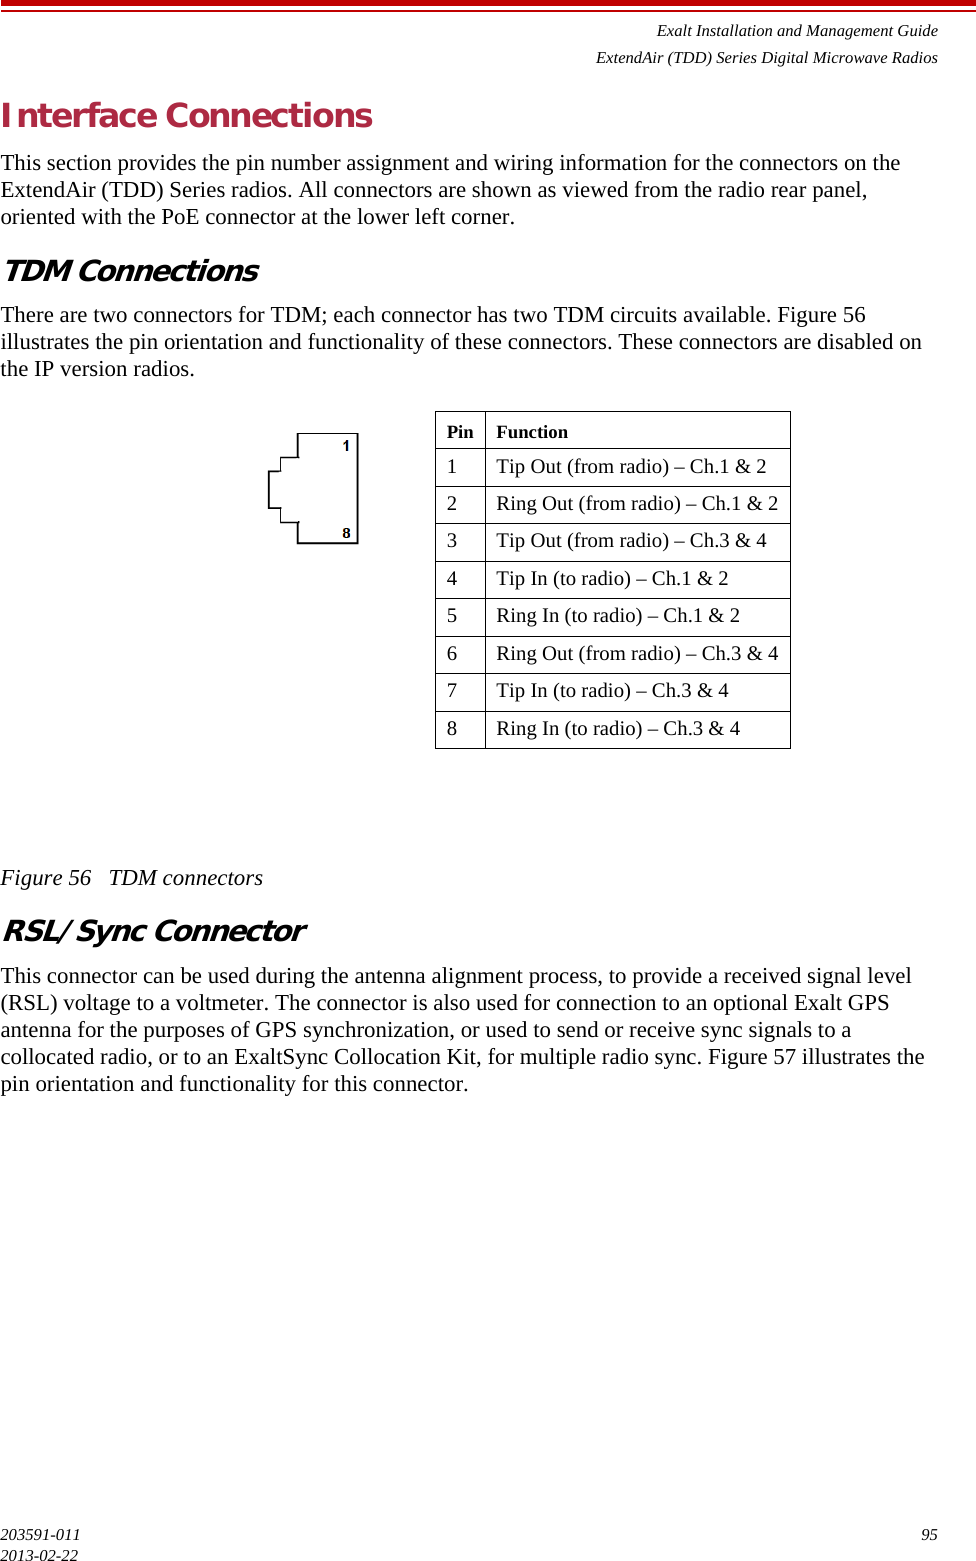 Exalt Installation and Management GuideExtendAir (TDD) Series Digital Microwave Radios203591-011 952013-02-22Interface ConnectionsThis section provides the pin number assignment and wiring information for the connectors on the ExtendAir (TDD) Series radios. All connectors are shown as viewed from the radio rear panel, oriented with the PoE connector at the lower left corner.TDM ConnectionsThere are two connectors for TDM; each connector has two TDM circuits available. Figure 56 illustrates the pin orientation and functionality of these connectors. These connectors are disabled on the IP version radios.Figure 56   TDM connectorsRSL/Sync ConnectorThis connector can be used during the antenna alignment process, to provide a received signal level (RSL) voltage to a voltmeter. The connector is also used for connection to an optional Exalt GPS antenna for the purposes of GPS synchronization, or used to send or receive sync signals to a collocated radio, or to an ExaltSync Collocation Kit, for multiple radio sync. Figure 57 illustrates the pin orientation and functionality for this connector.Pin Function1 Tip Out (from radio) – Ch.1 &amp; 22 Ring Out (from radio) – Ch.1 &amp; 23 Tip Out (from radio) – Ch.3 &amp; 44 Tip In (to radio) – Ch.1 &amp; 25 Ring In (to radio) – Ch.1 &amp; 26 Ring Out (from radio) – Ch.3 &amp; 47 Tip In (to radio) – Ch.3 &amp; 48 Ring In (to radio) – Ch.3 &amp; 4